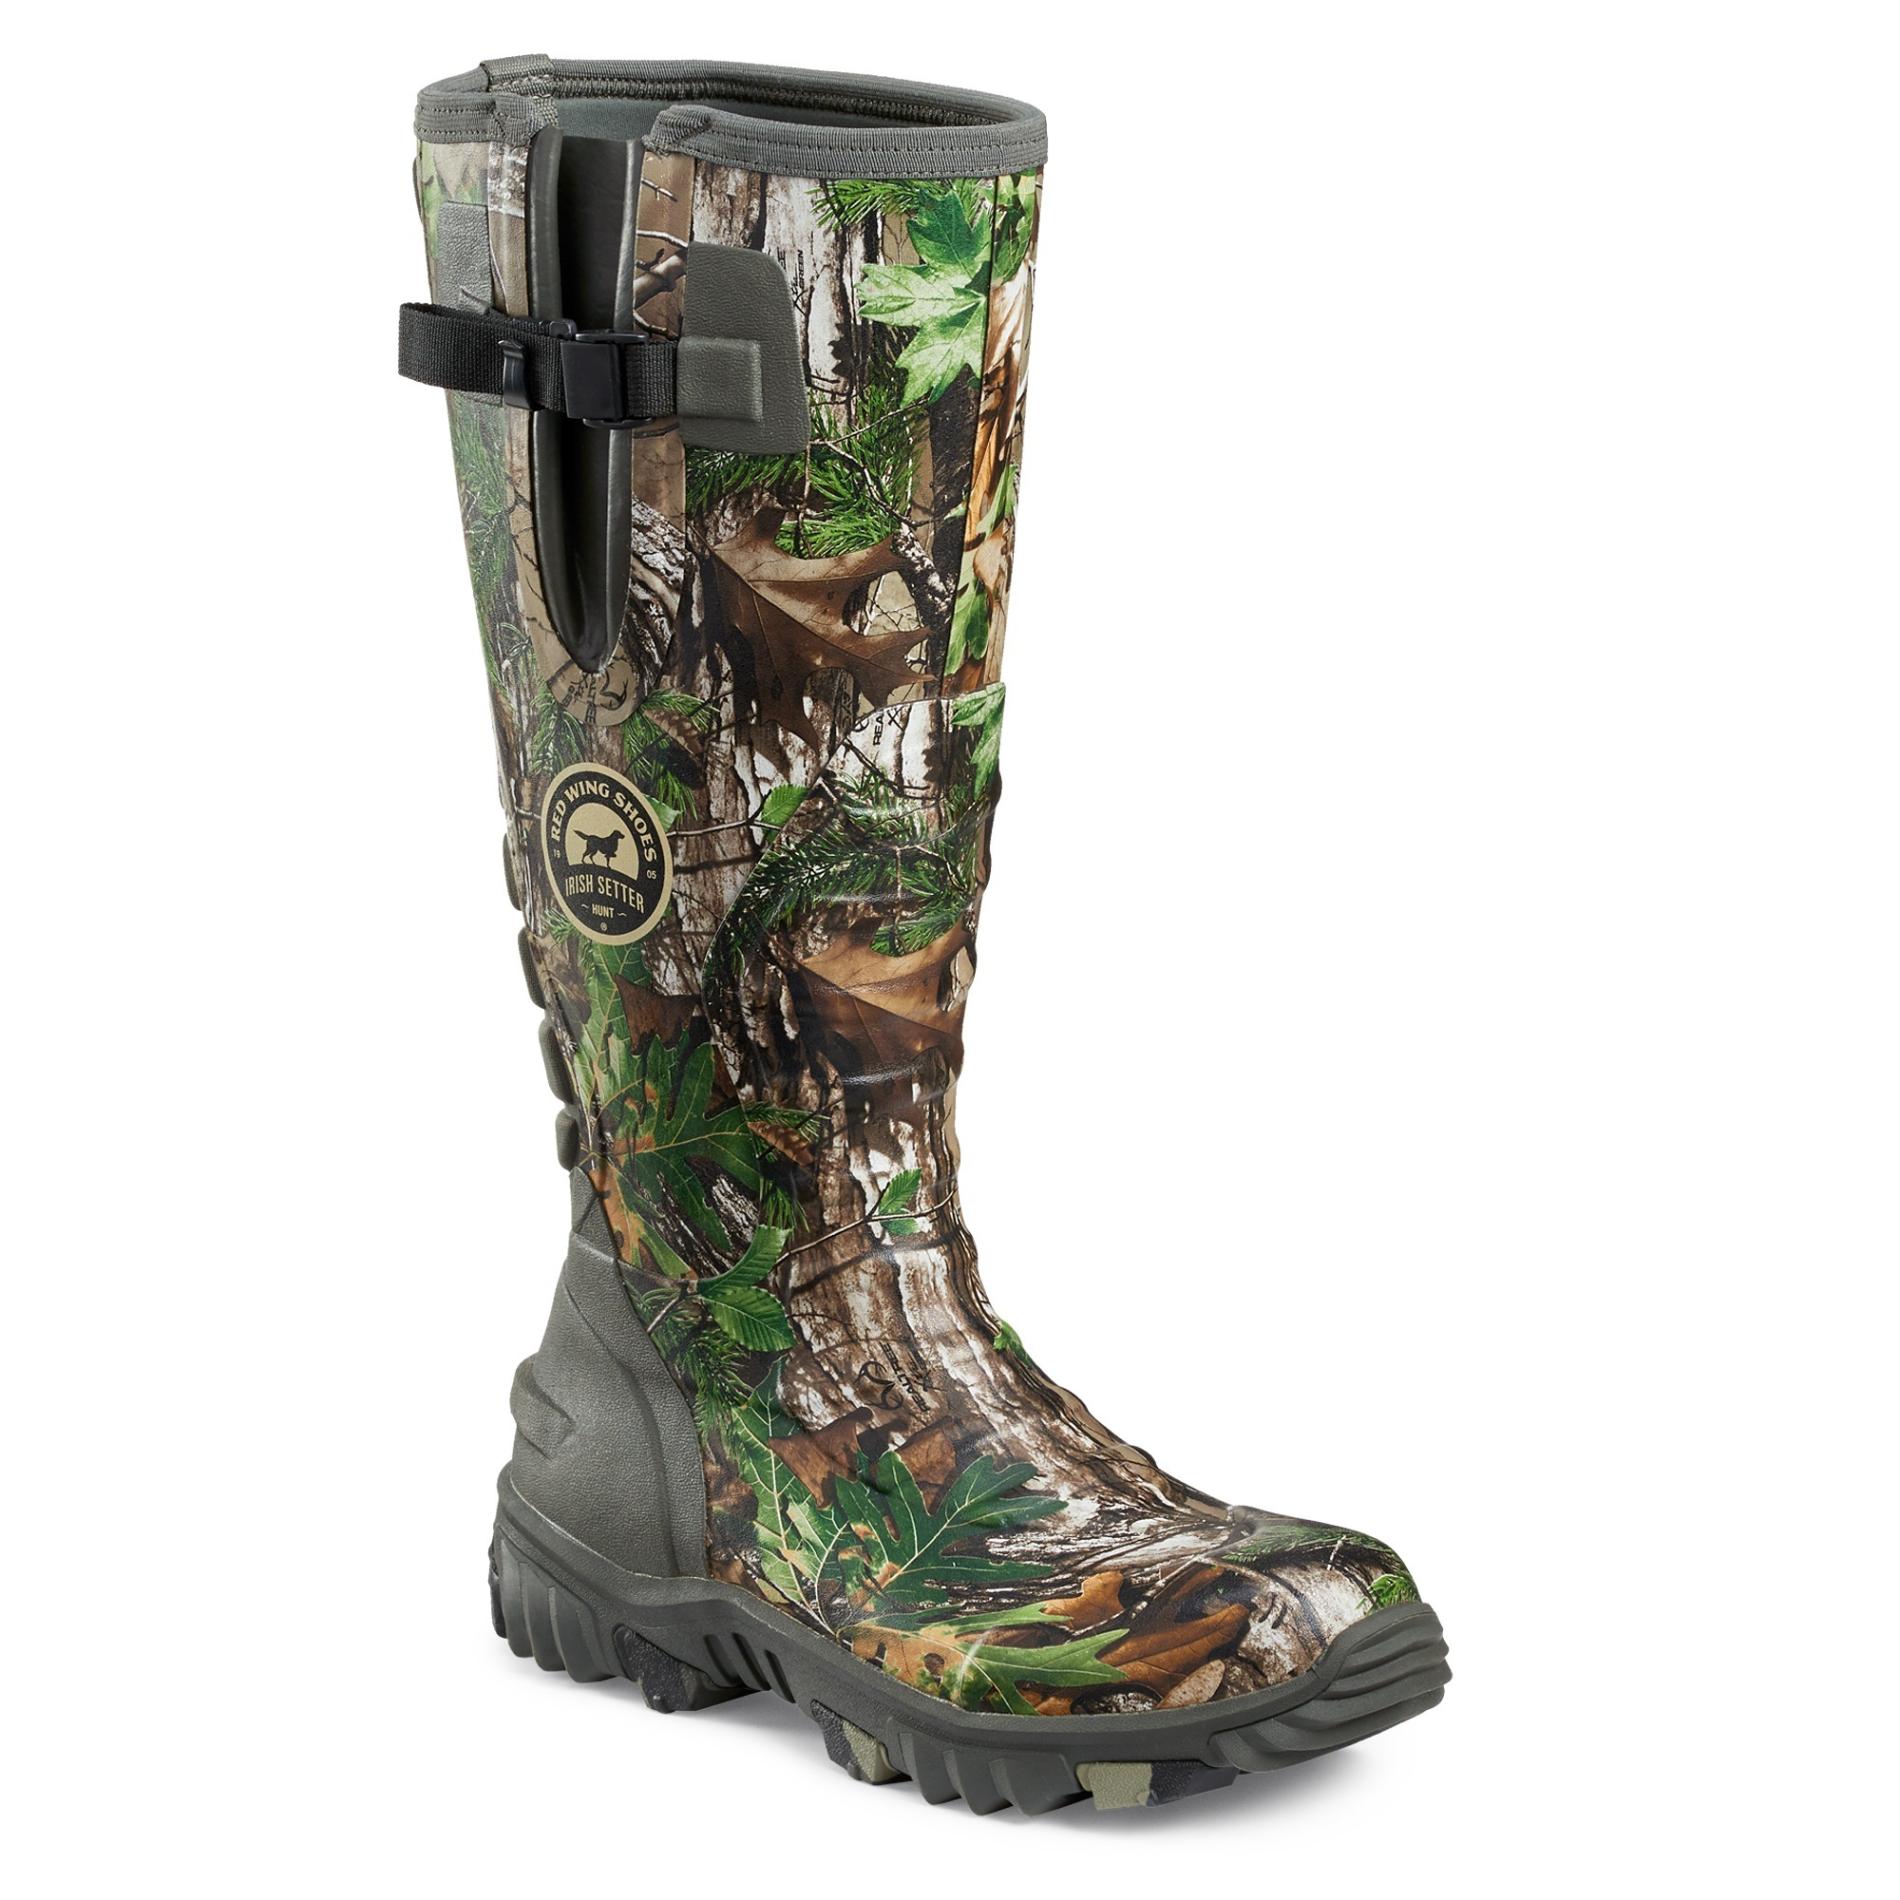 Irish Setter Boots by Red Wing Shoes Men's Rutmaster 2.0 Waterproof Hunting Boot - Green/Camo